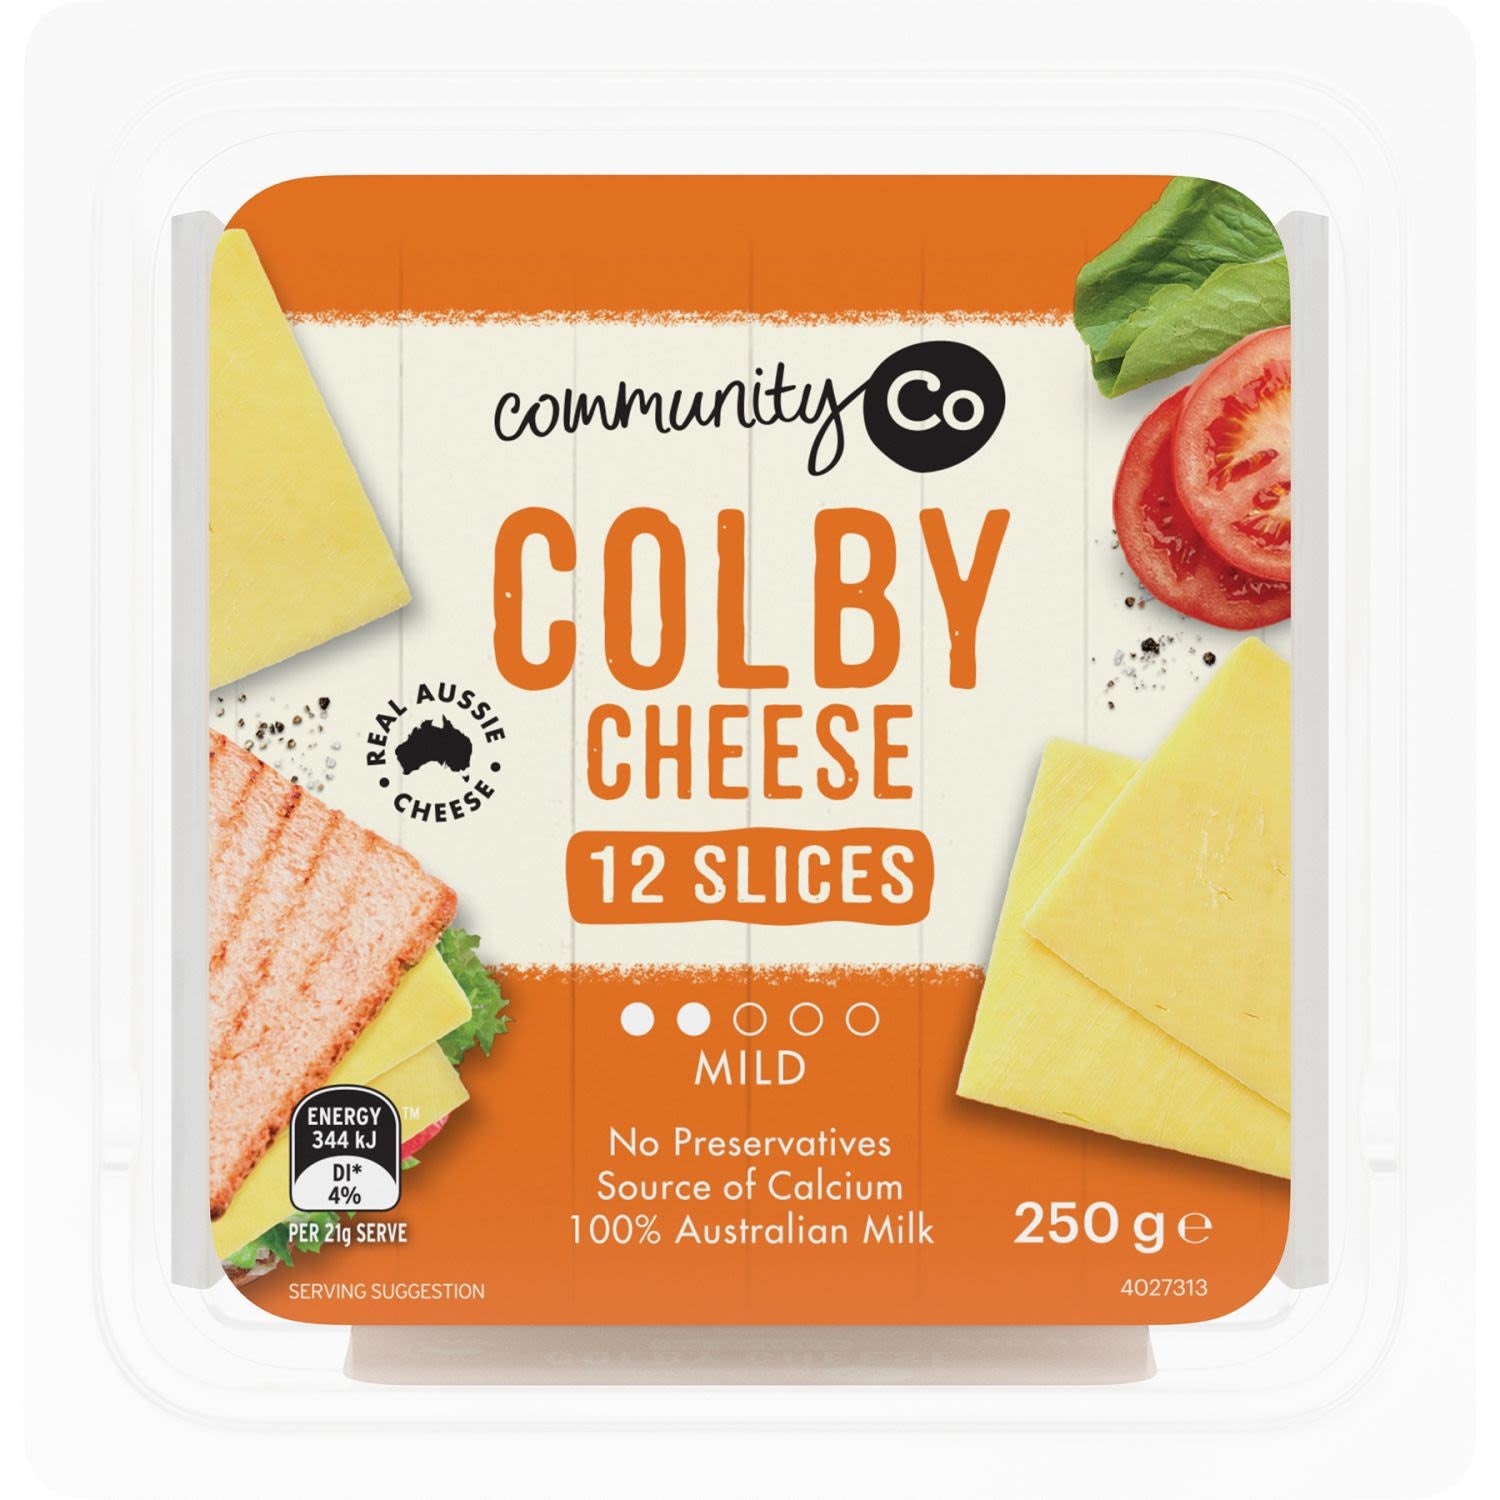 Community Co Colby Cheese Slices 12pk 250g